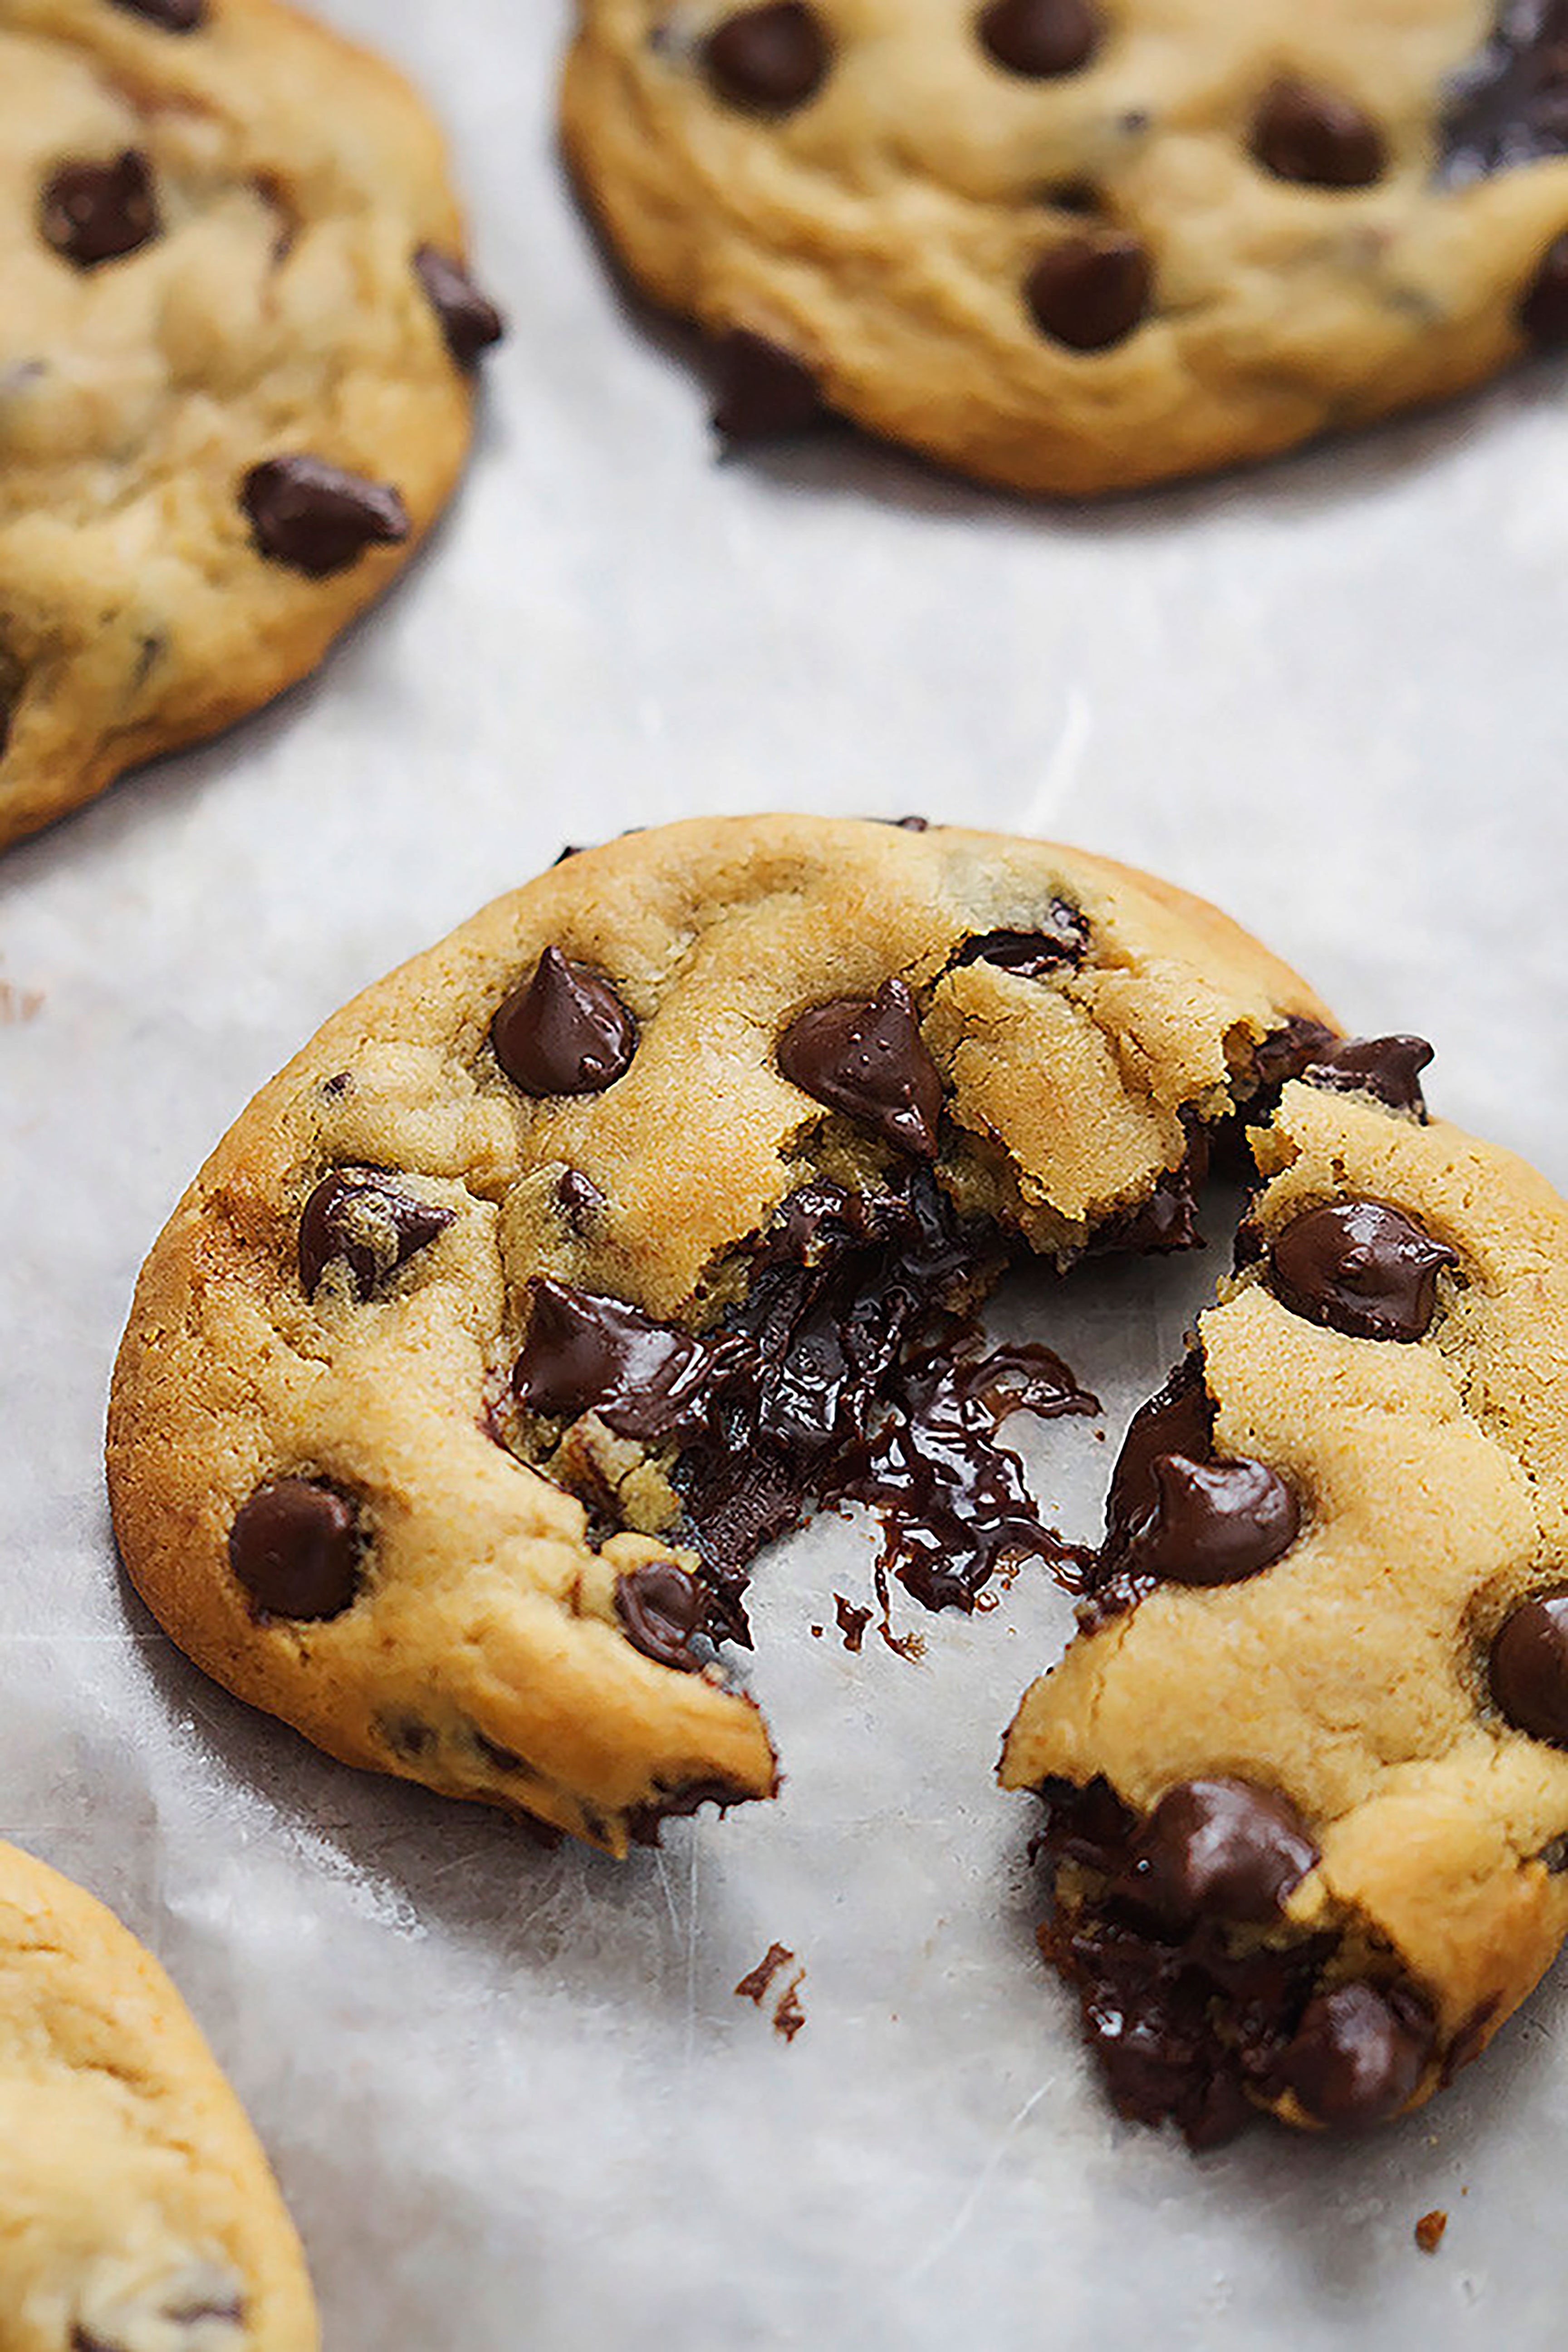 Chocolate Chocolate Chip Cookies
 8 Incredible ways to use Hot Fudge Sauce in Desserts The